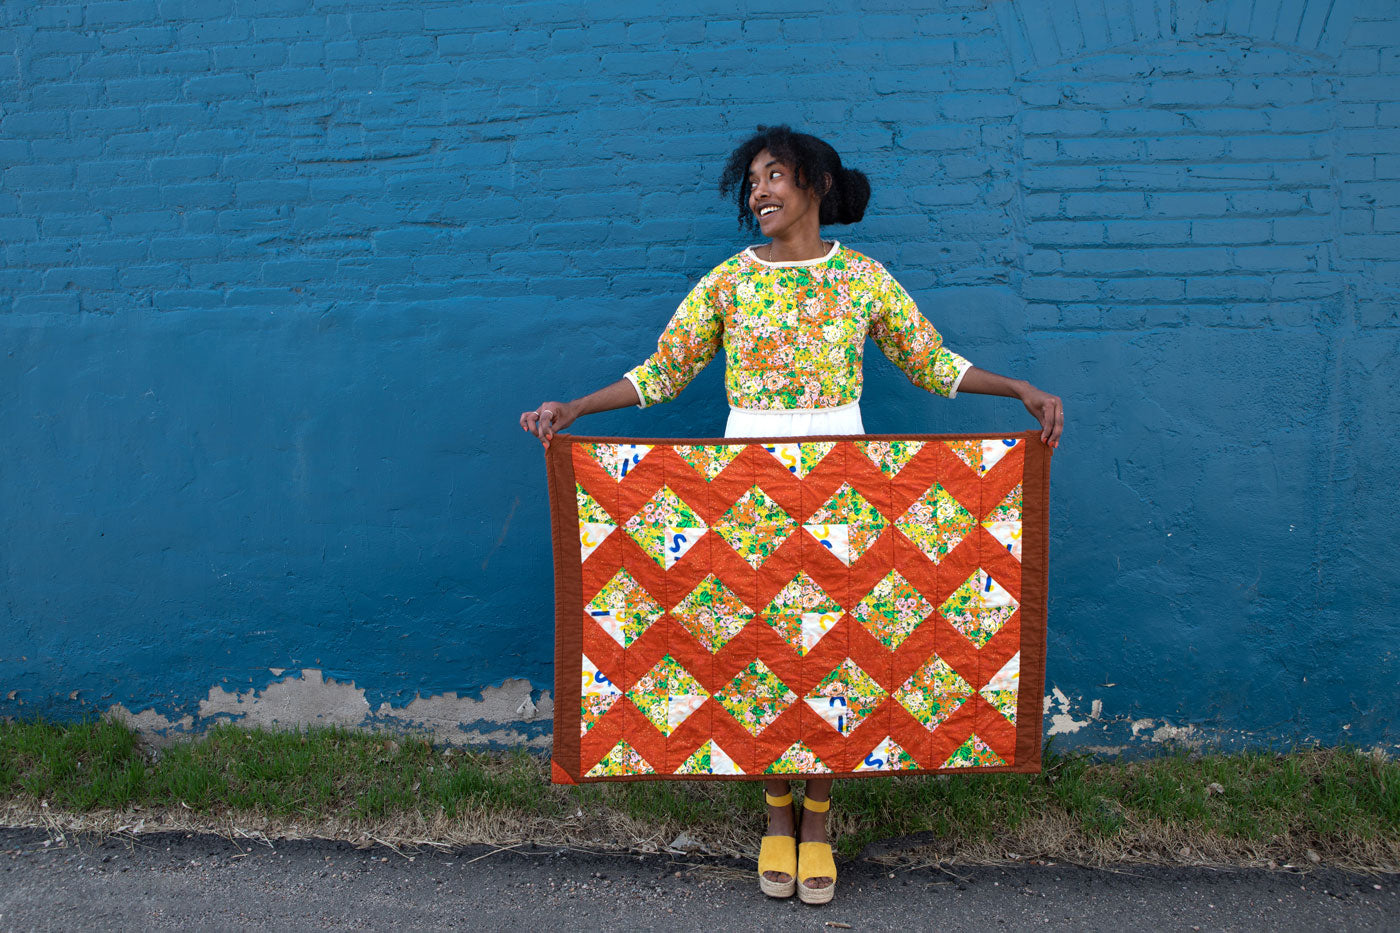 Beza stands in front of a blue wall holding her Charming Xs quilt. Her face is looking to the side with a wide smile, she is wearing a colorful quilted top and bright yellow shoes. 